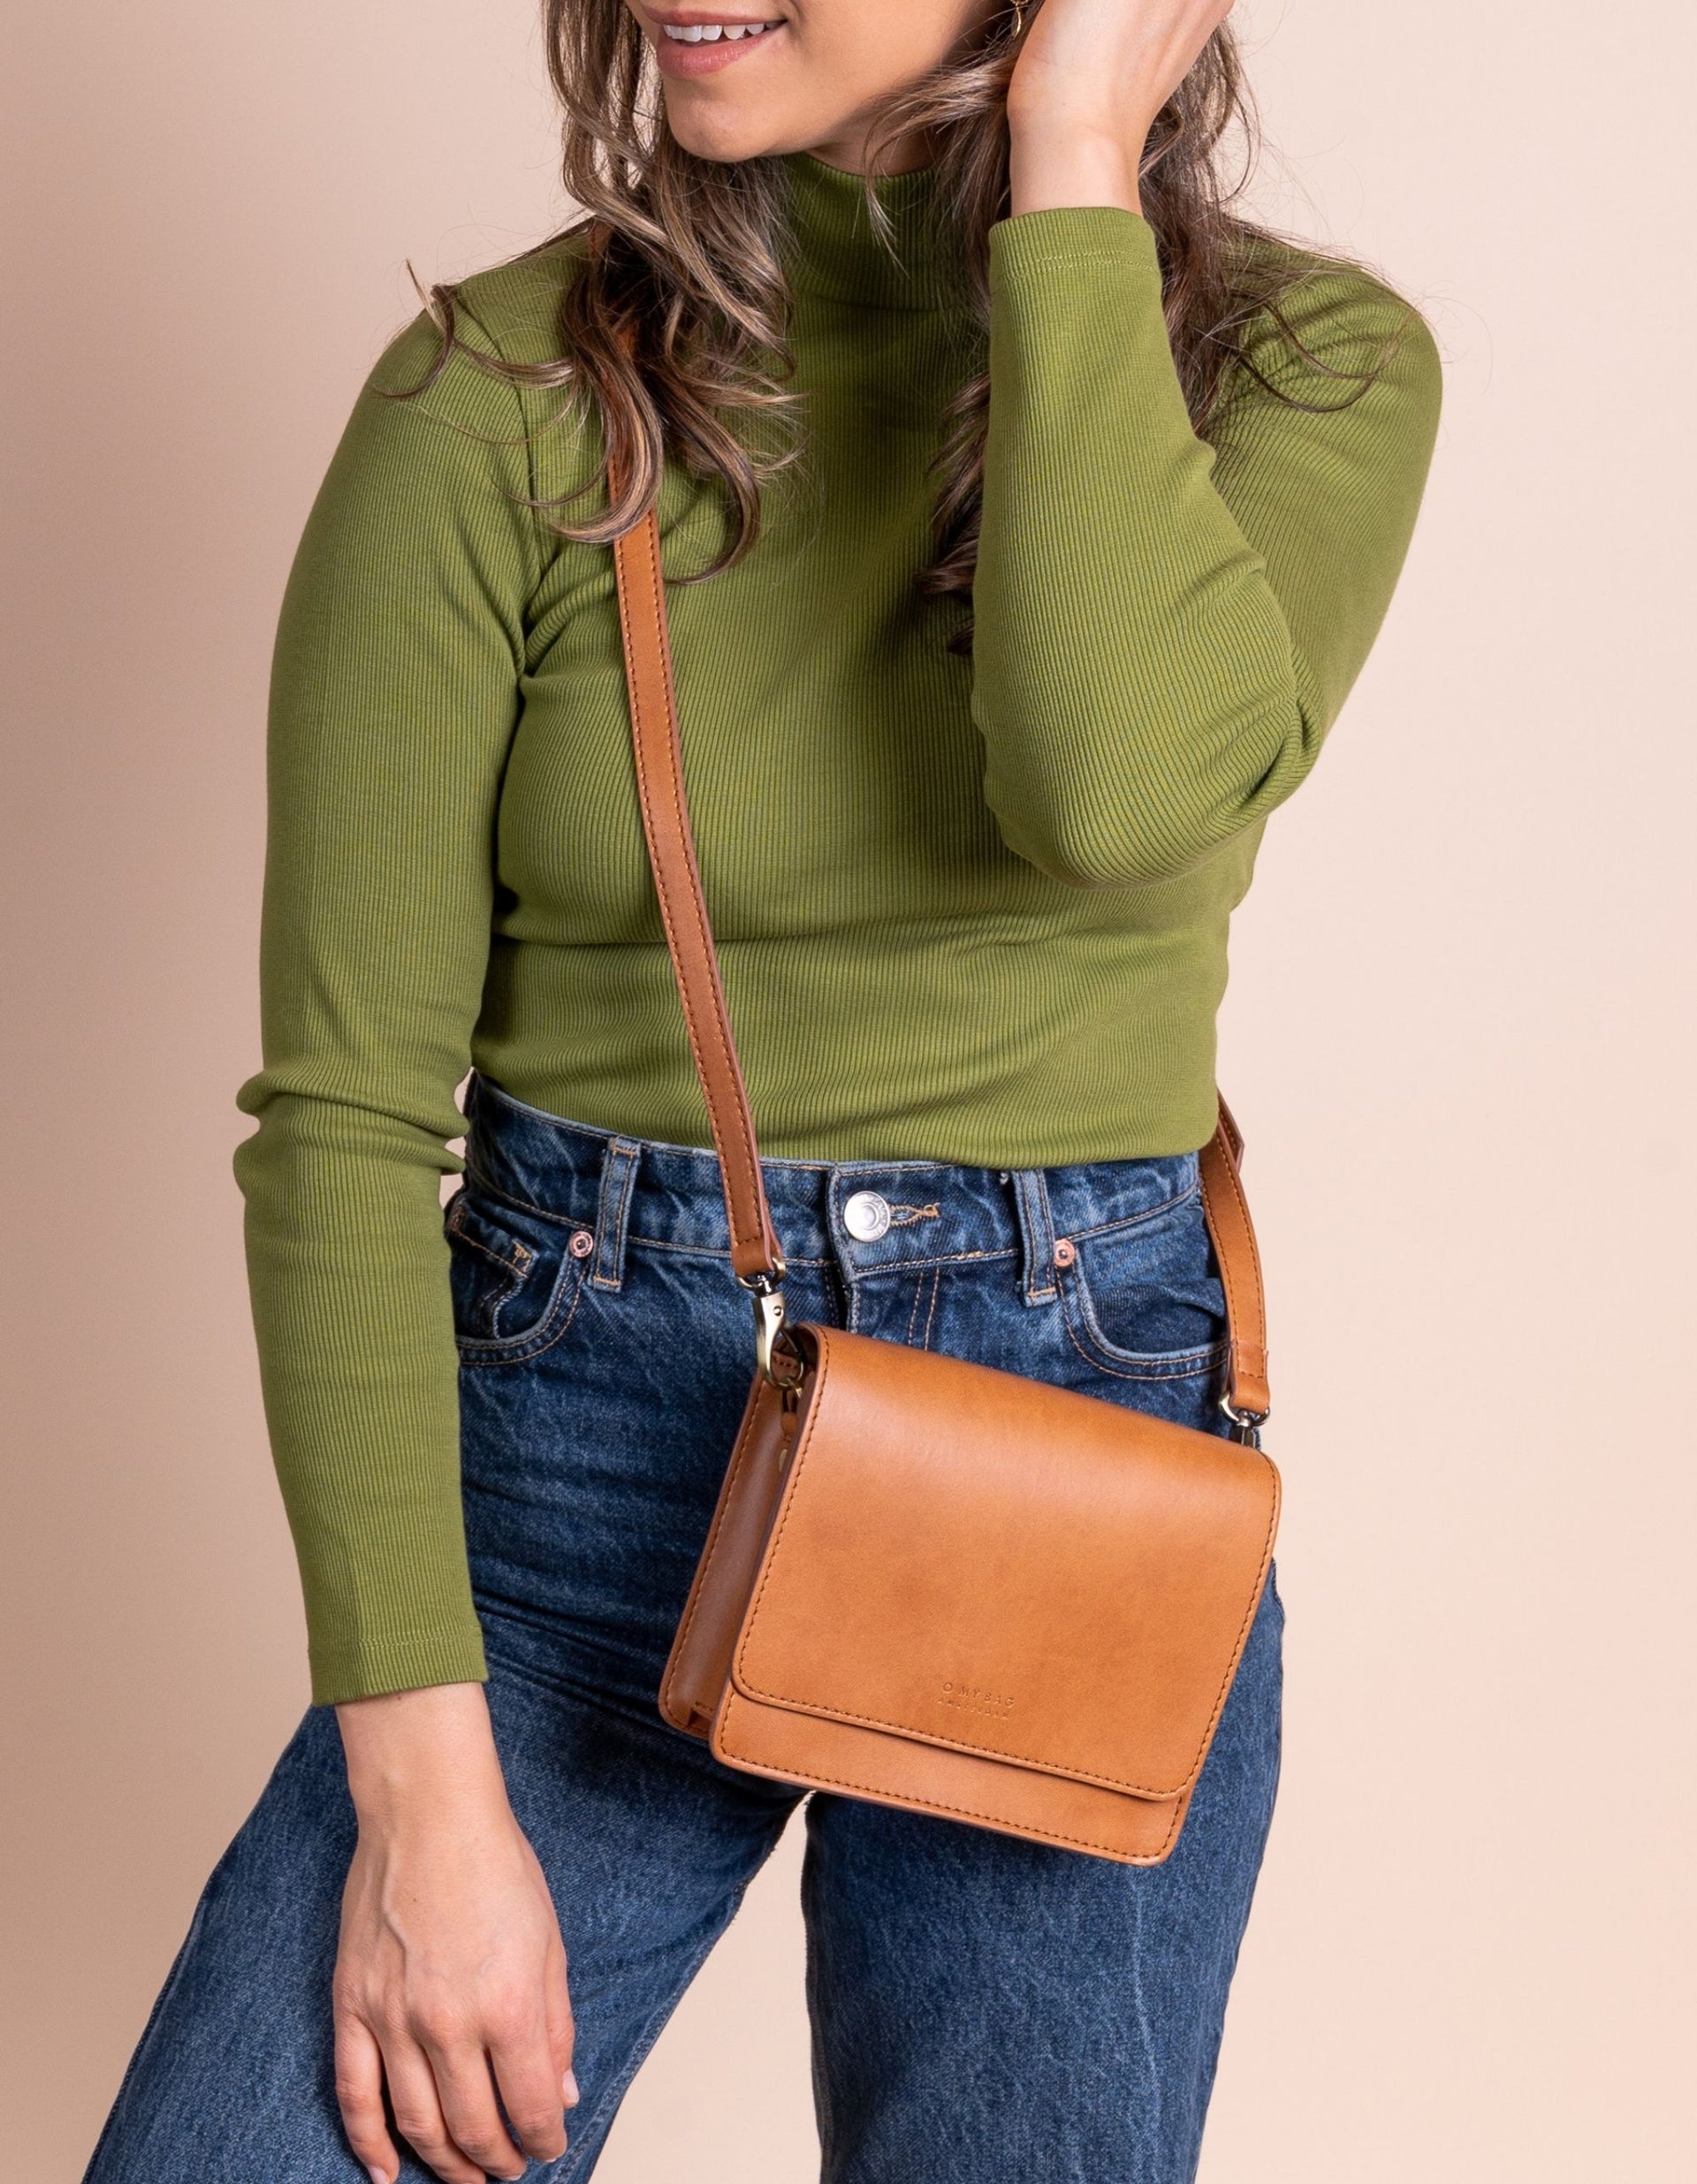 Model wearing brown crossbody bag with brown strap